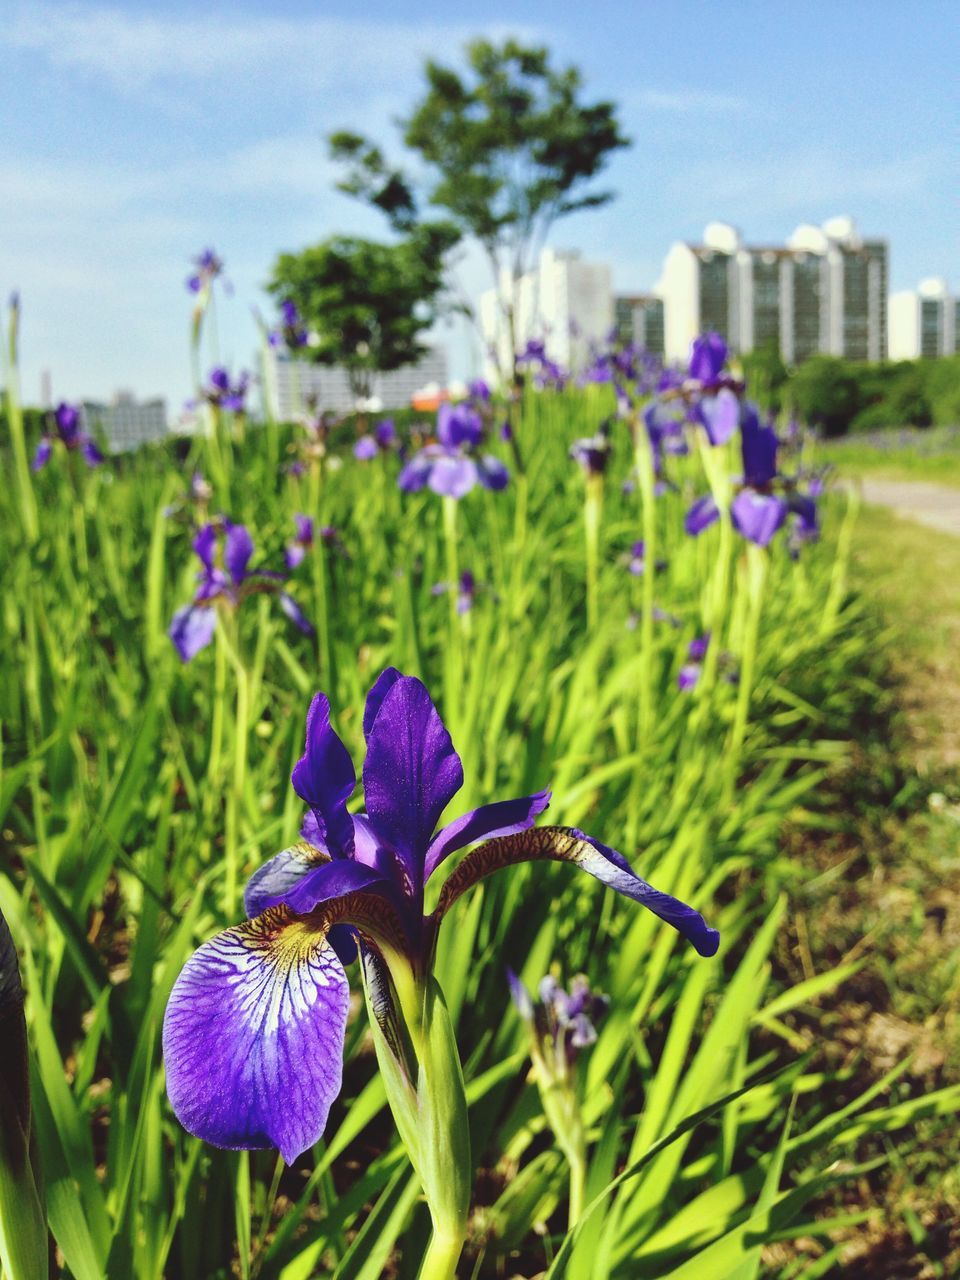 flower, purple, freshness, growth, fragility, plant, focus on foreground, beauty in nature, blooming, nature, petal, close-up, flower head, field, in bloom, blue, day, stem, outdoors, green color